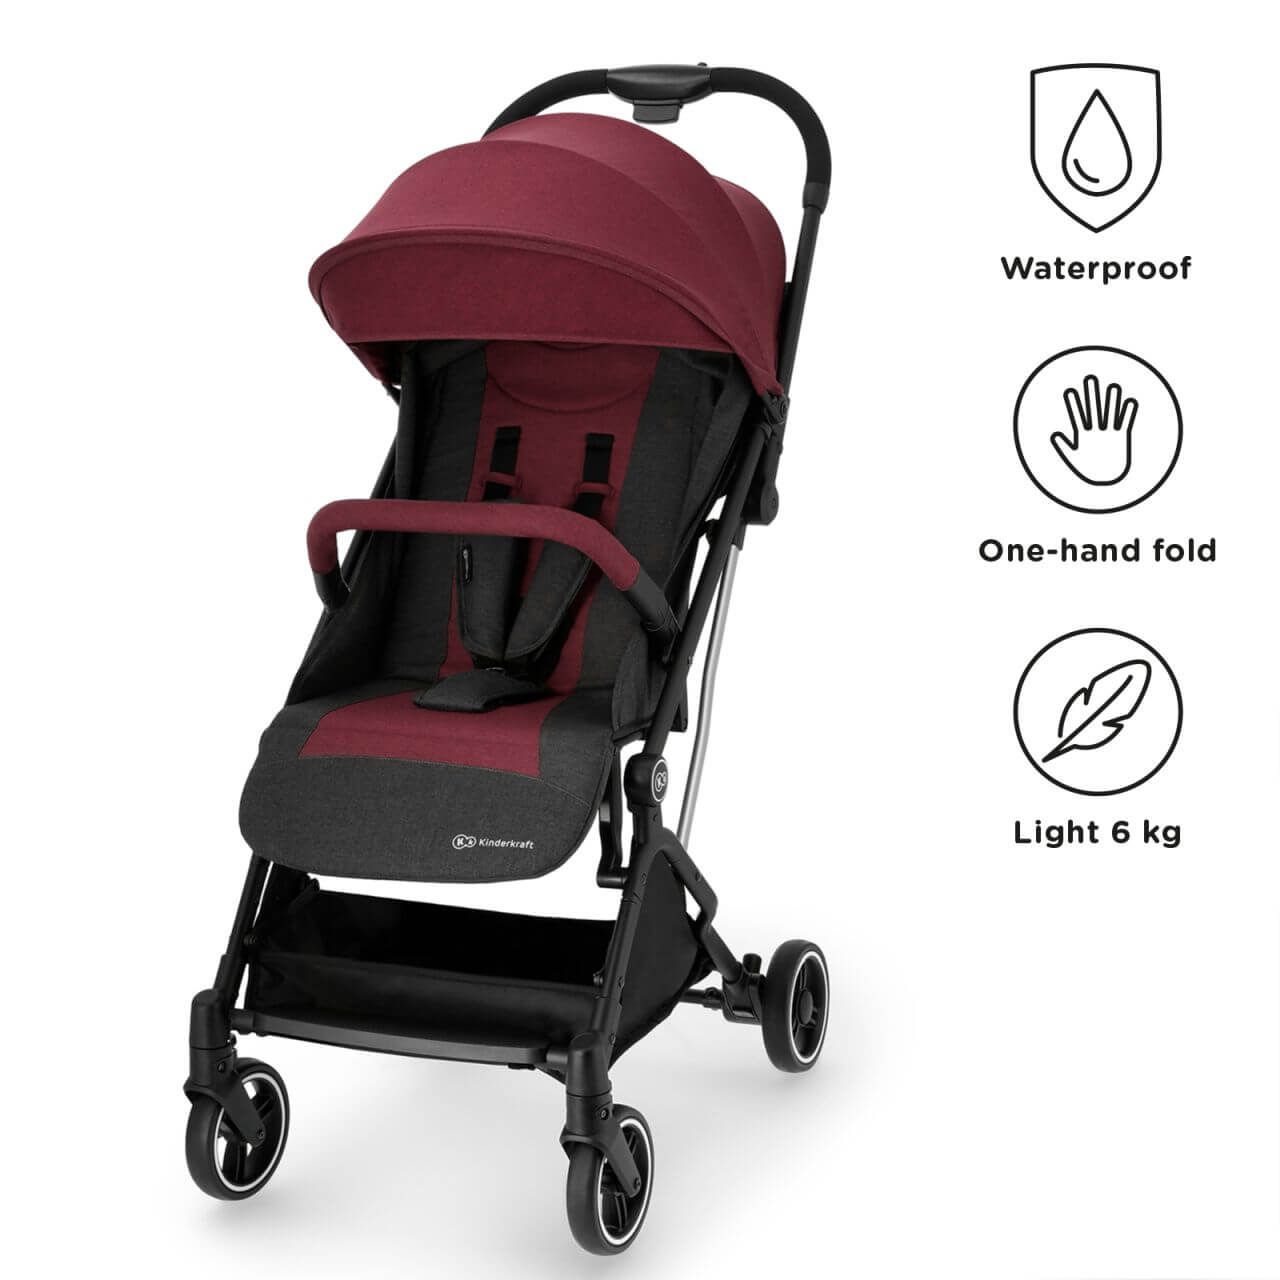 Light stroller suitable from birth to 15 kg